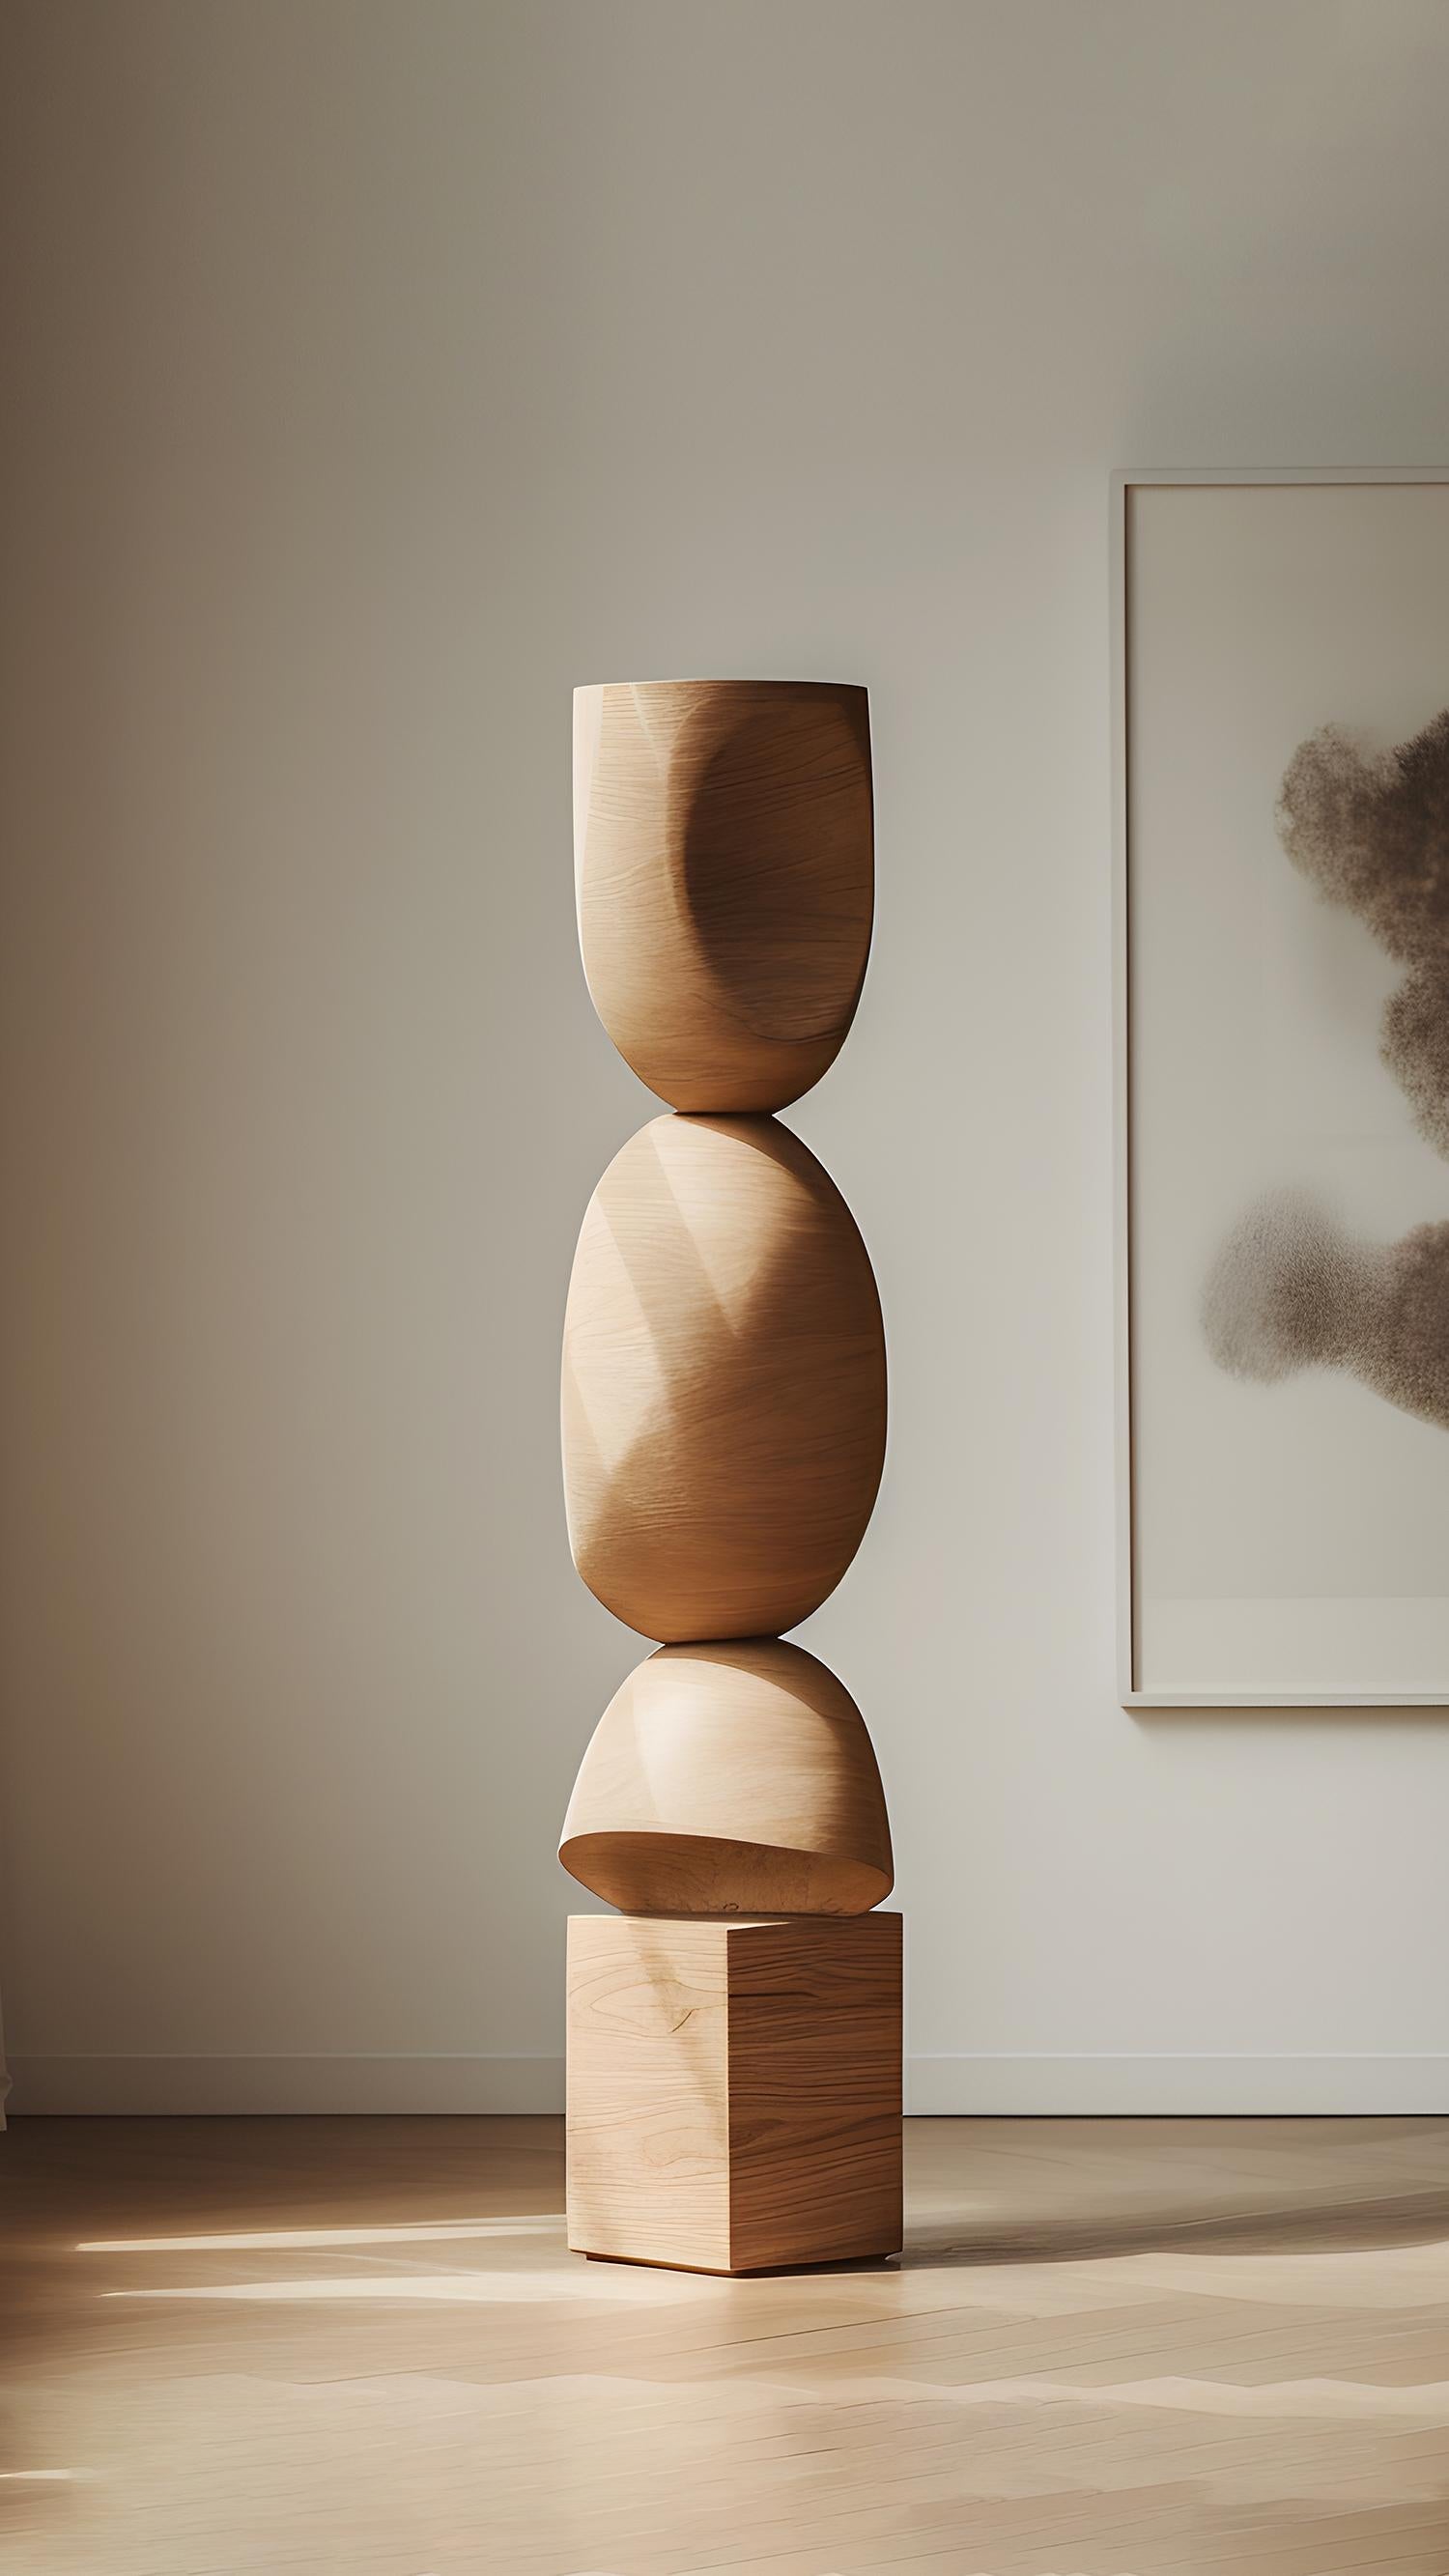 Hand-Crafted Still Stand No25: Handcrafted Walnut Serenity Totem by Joel Escalona For Sale